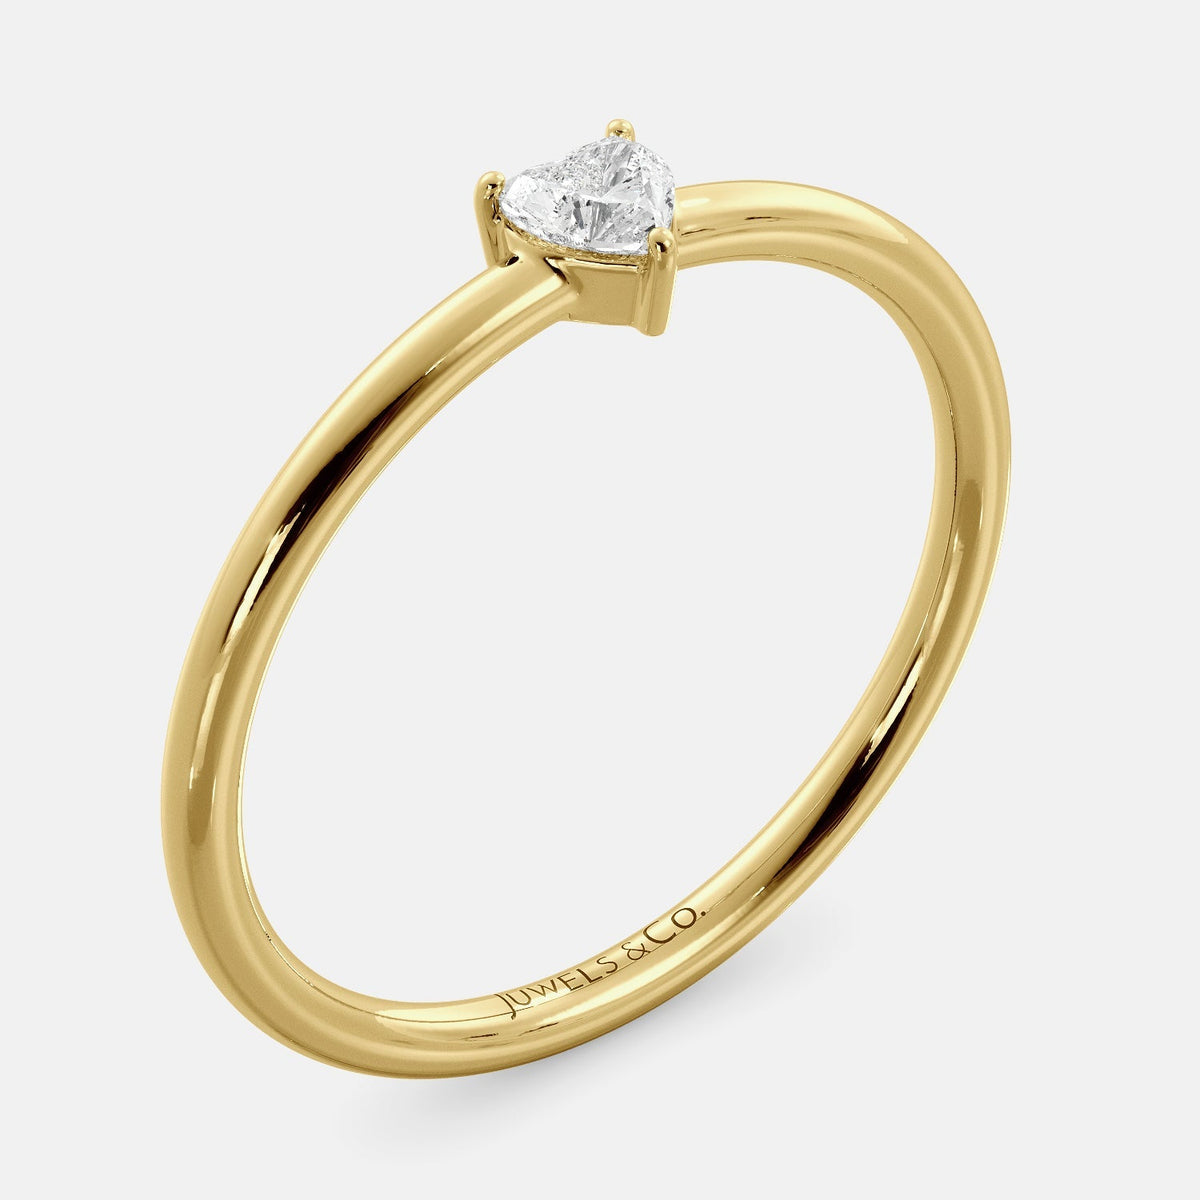 A close-up of a heart-shaped solitaire diamond ring in recycled yellow gold. The ring is set with a single, large diamond in the center of a heart-shaped setting. The ring is made of recycled yellow gold and has a simple, elegant design. The diamond is sparkling and reflects light beautifully. The ring is a perfect gift for a loved one or a special occasion.